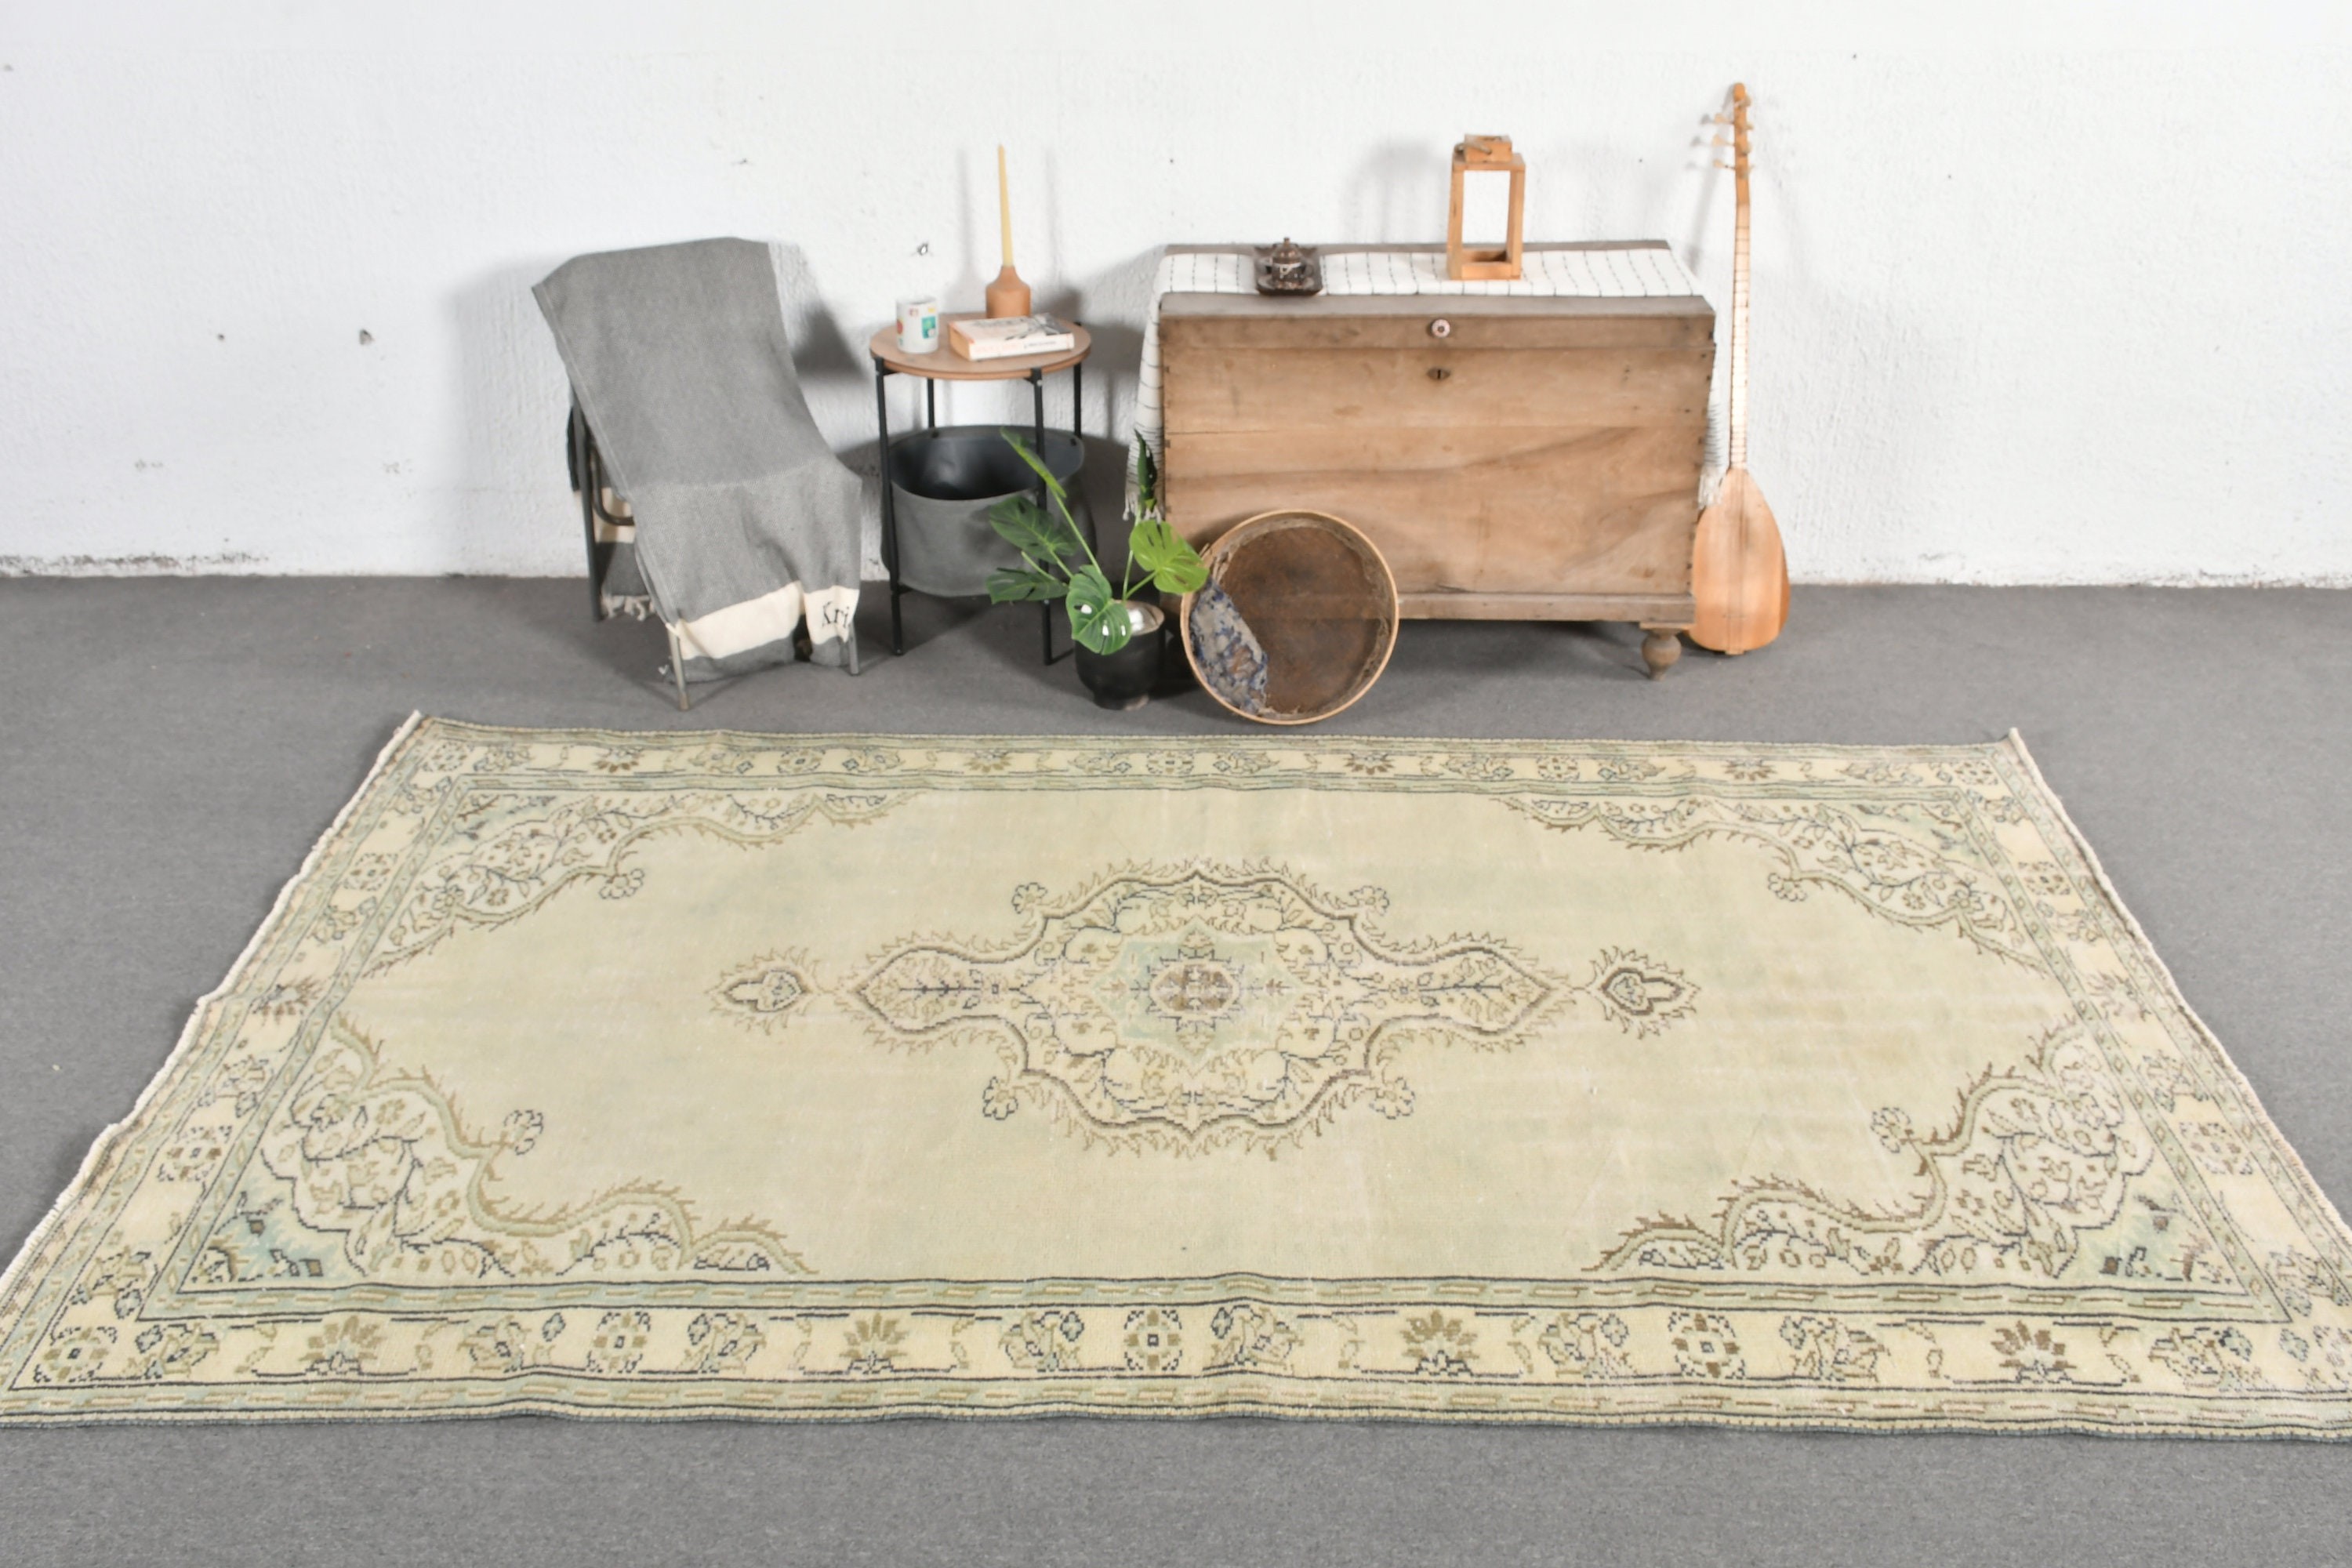 Green Home Decor Rug, Turkish Rugs, Home Decor Rugs, Living Room Rug, 6x9.6 ft Large Rugs, Vintage Rug, Salon Rug, Muted Rugs